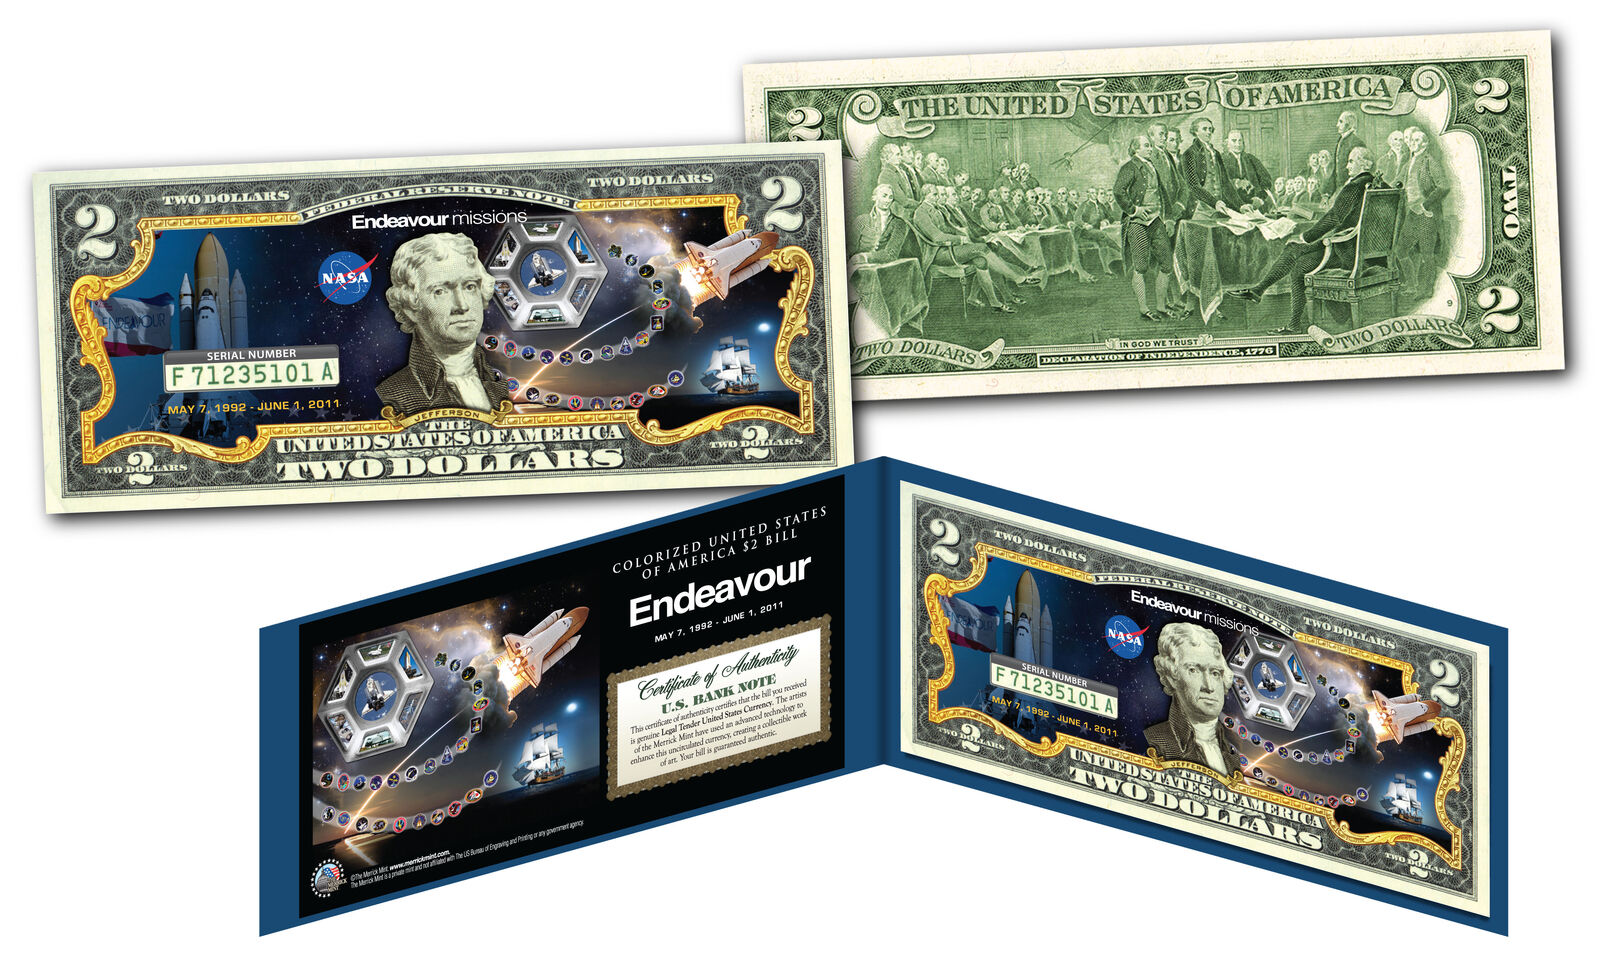 Space Shuttle ENDEAVOUR Missions Official Legal Tender U.S. $2 Bill NASA